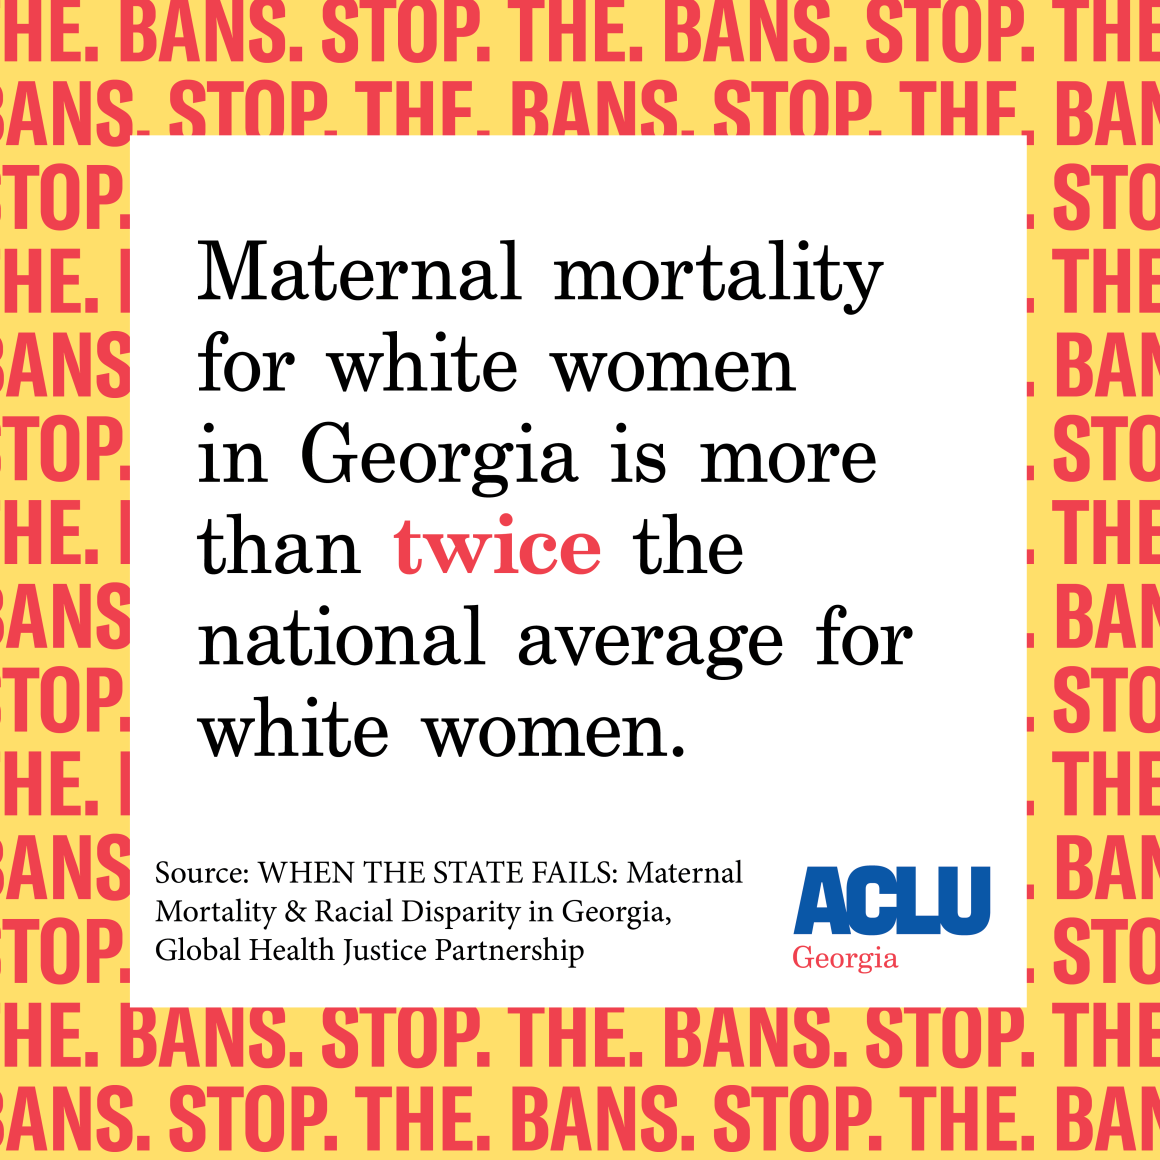 Maternal mortality for white women in Georgia is more than twice the national average for white women.